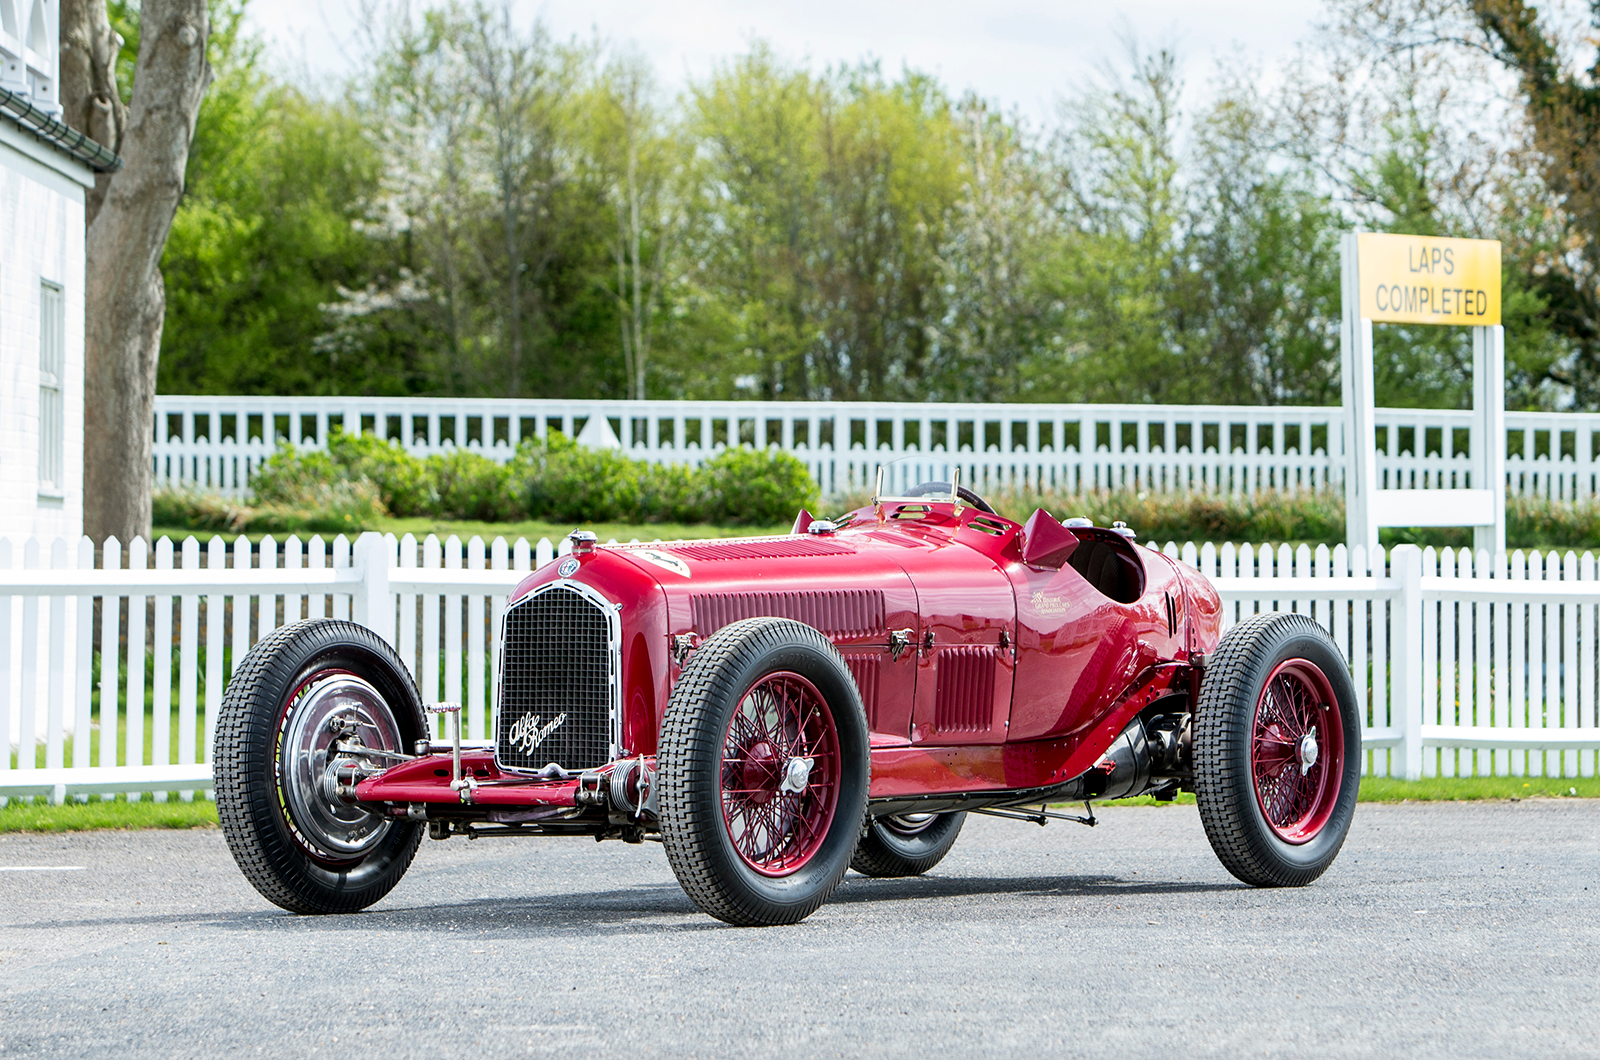 '2 VEV' makes £10m and Surtees BMW £3.4m at FoS auction